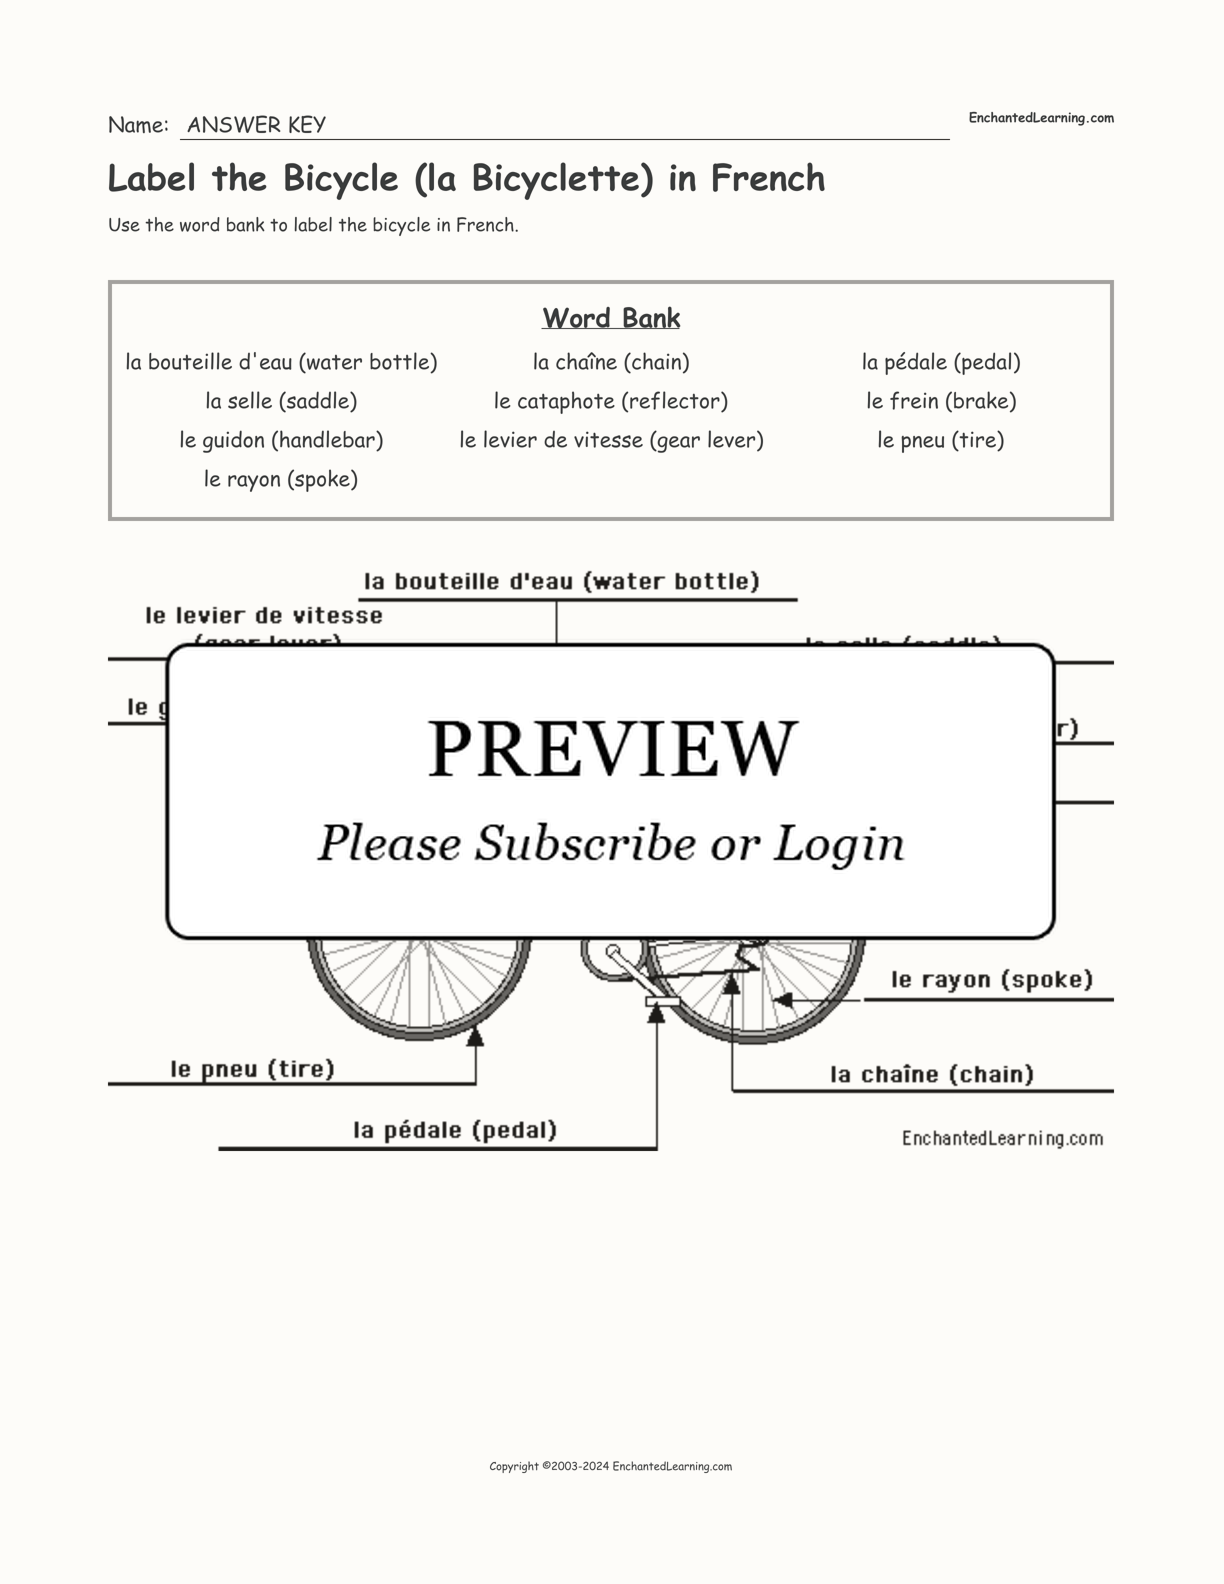 Label the Bicycle (la Bicyclette) in French interactive worksheet page 2